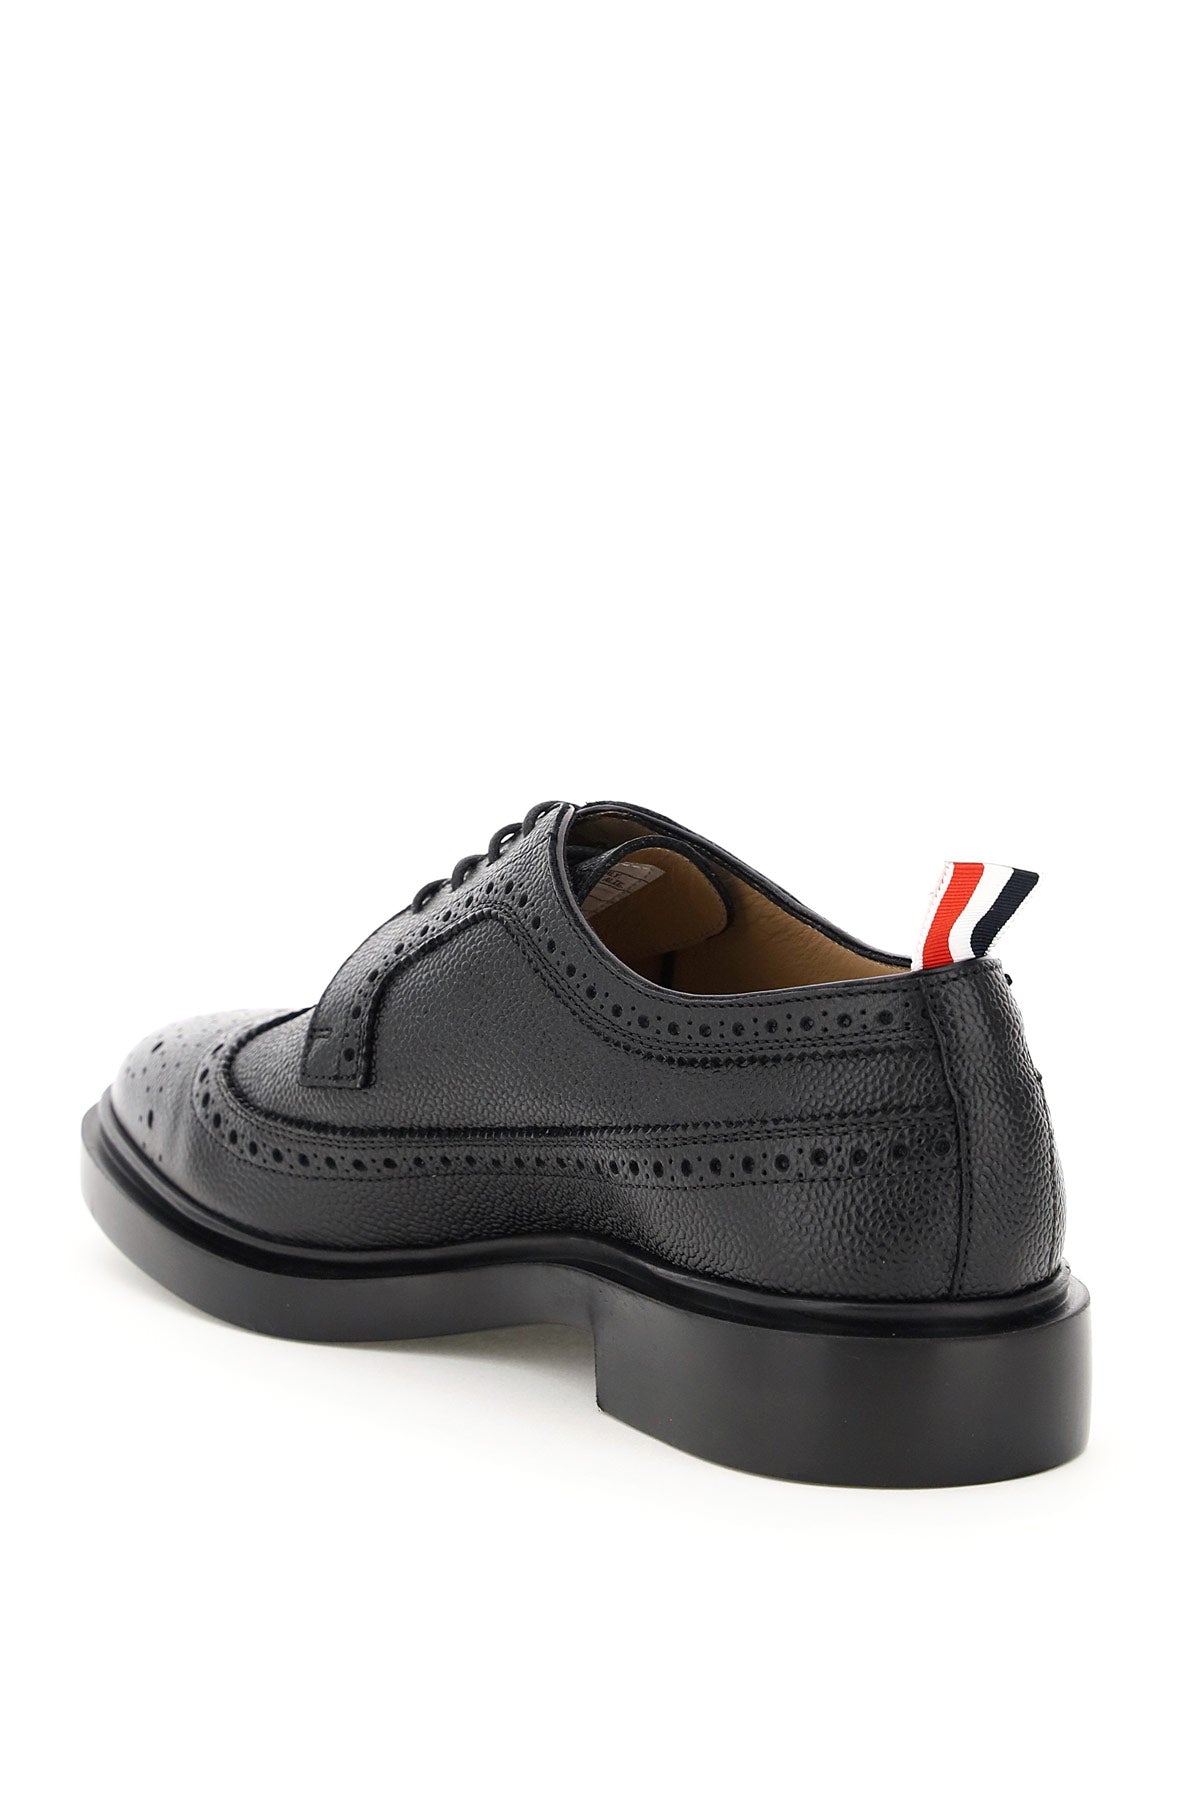 Thom browne longwing brogue lace-up shoes-2